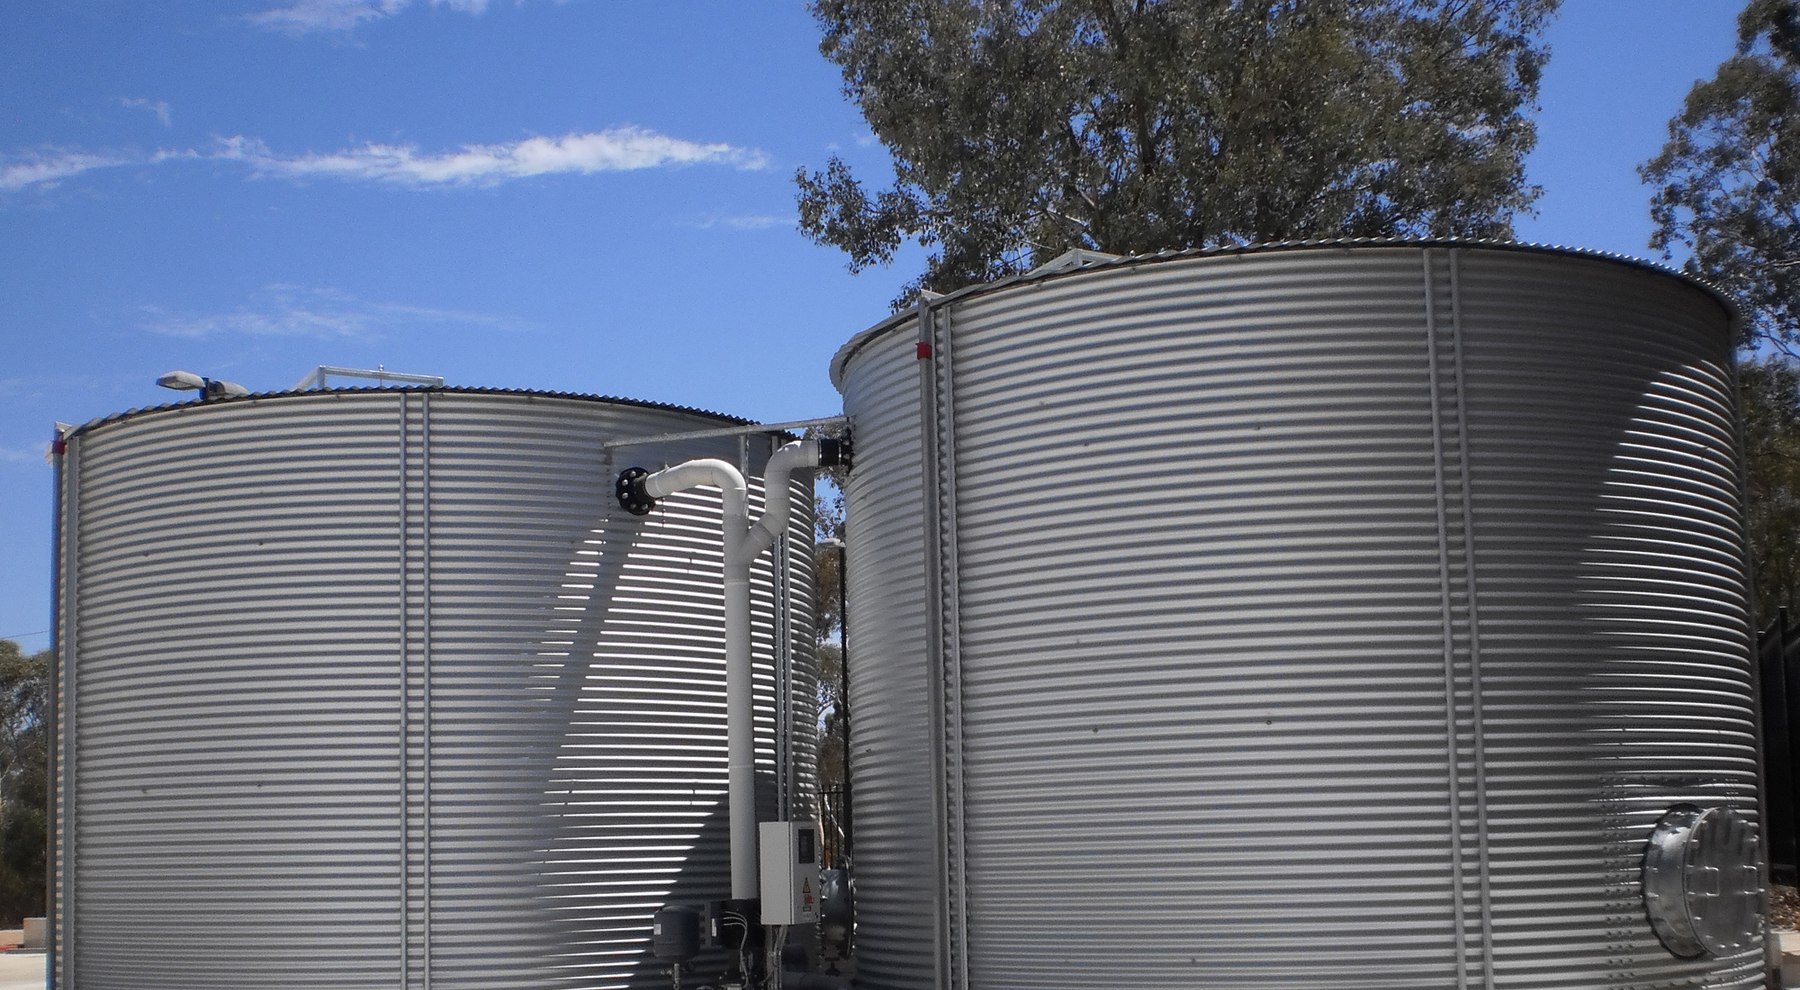 Interest and investment in water tanks is higher than ever.